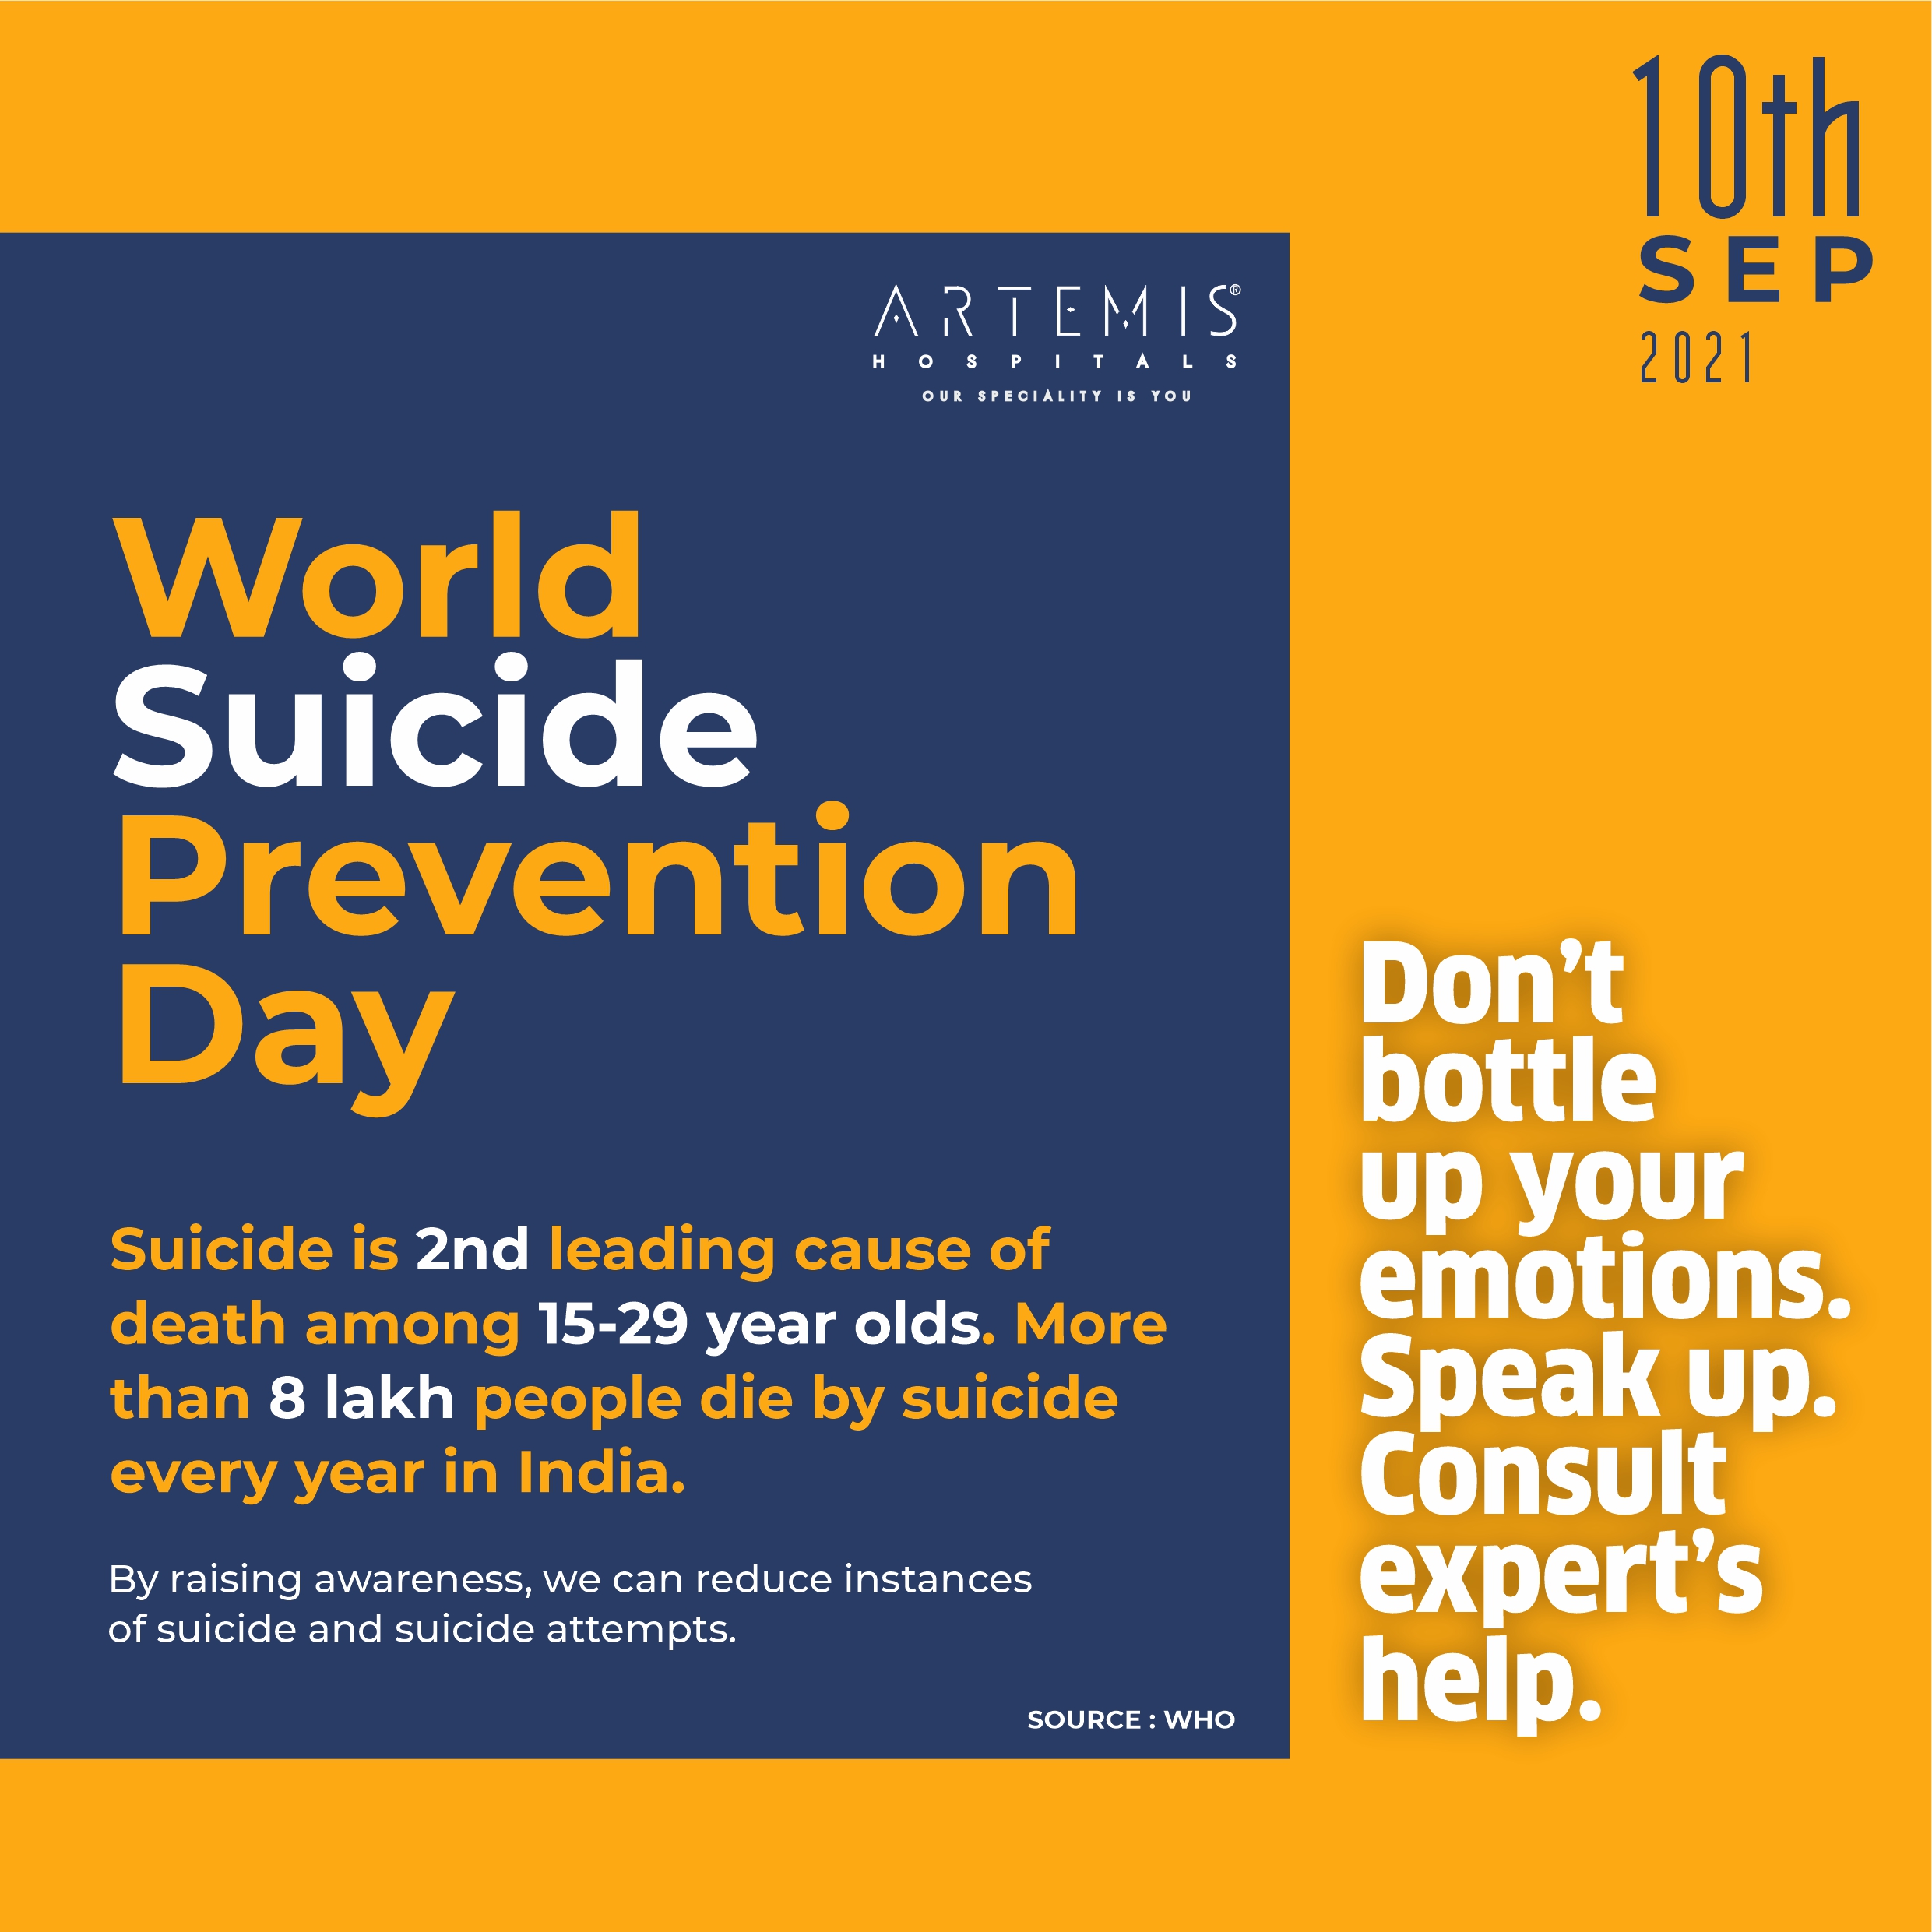 world-suicide-prevention-day-10th-sep-2021